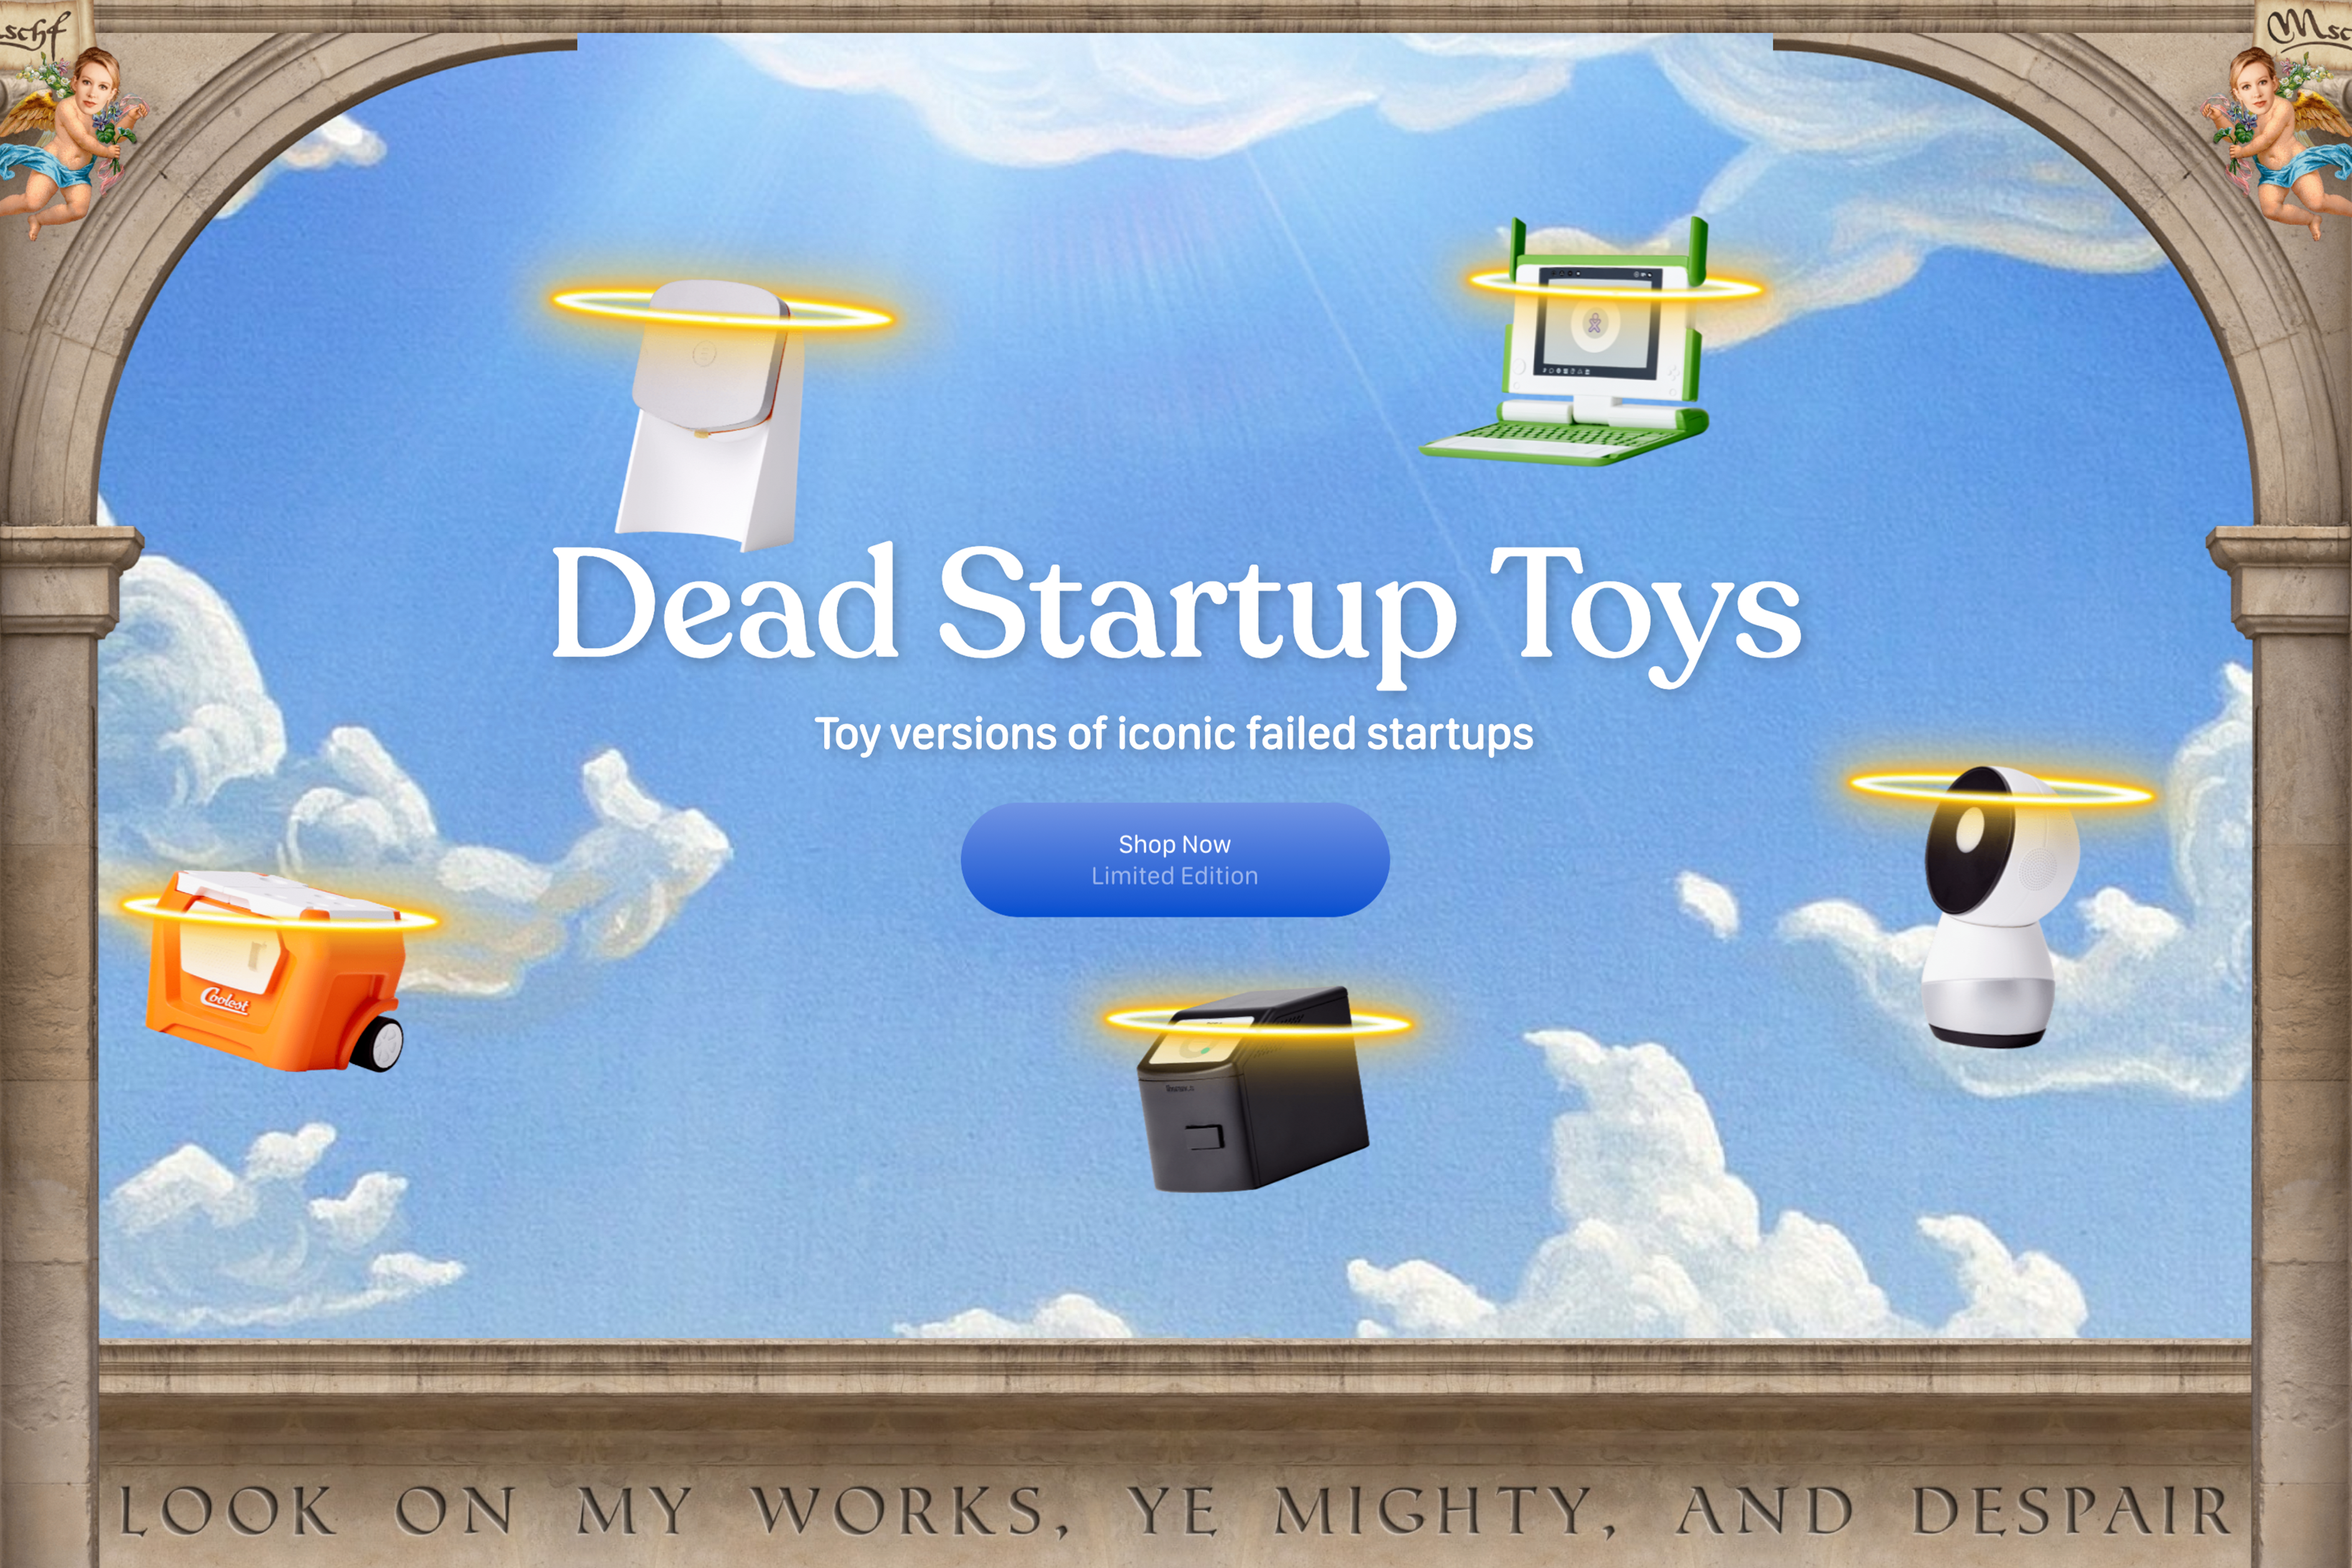 Dead startup toys flying around in the air